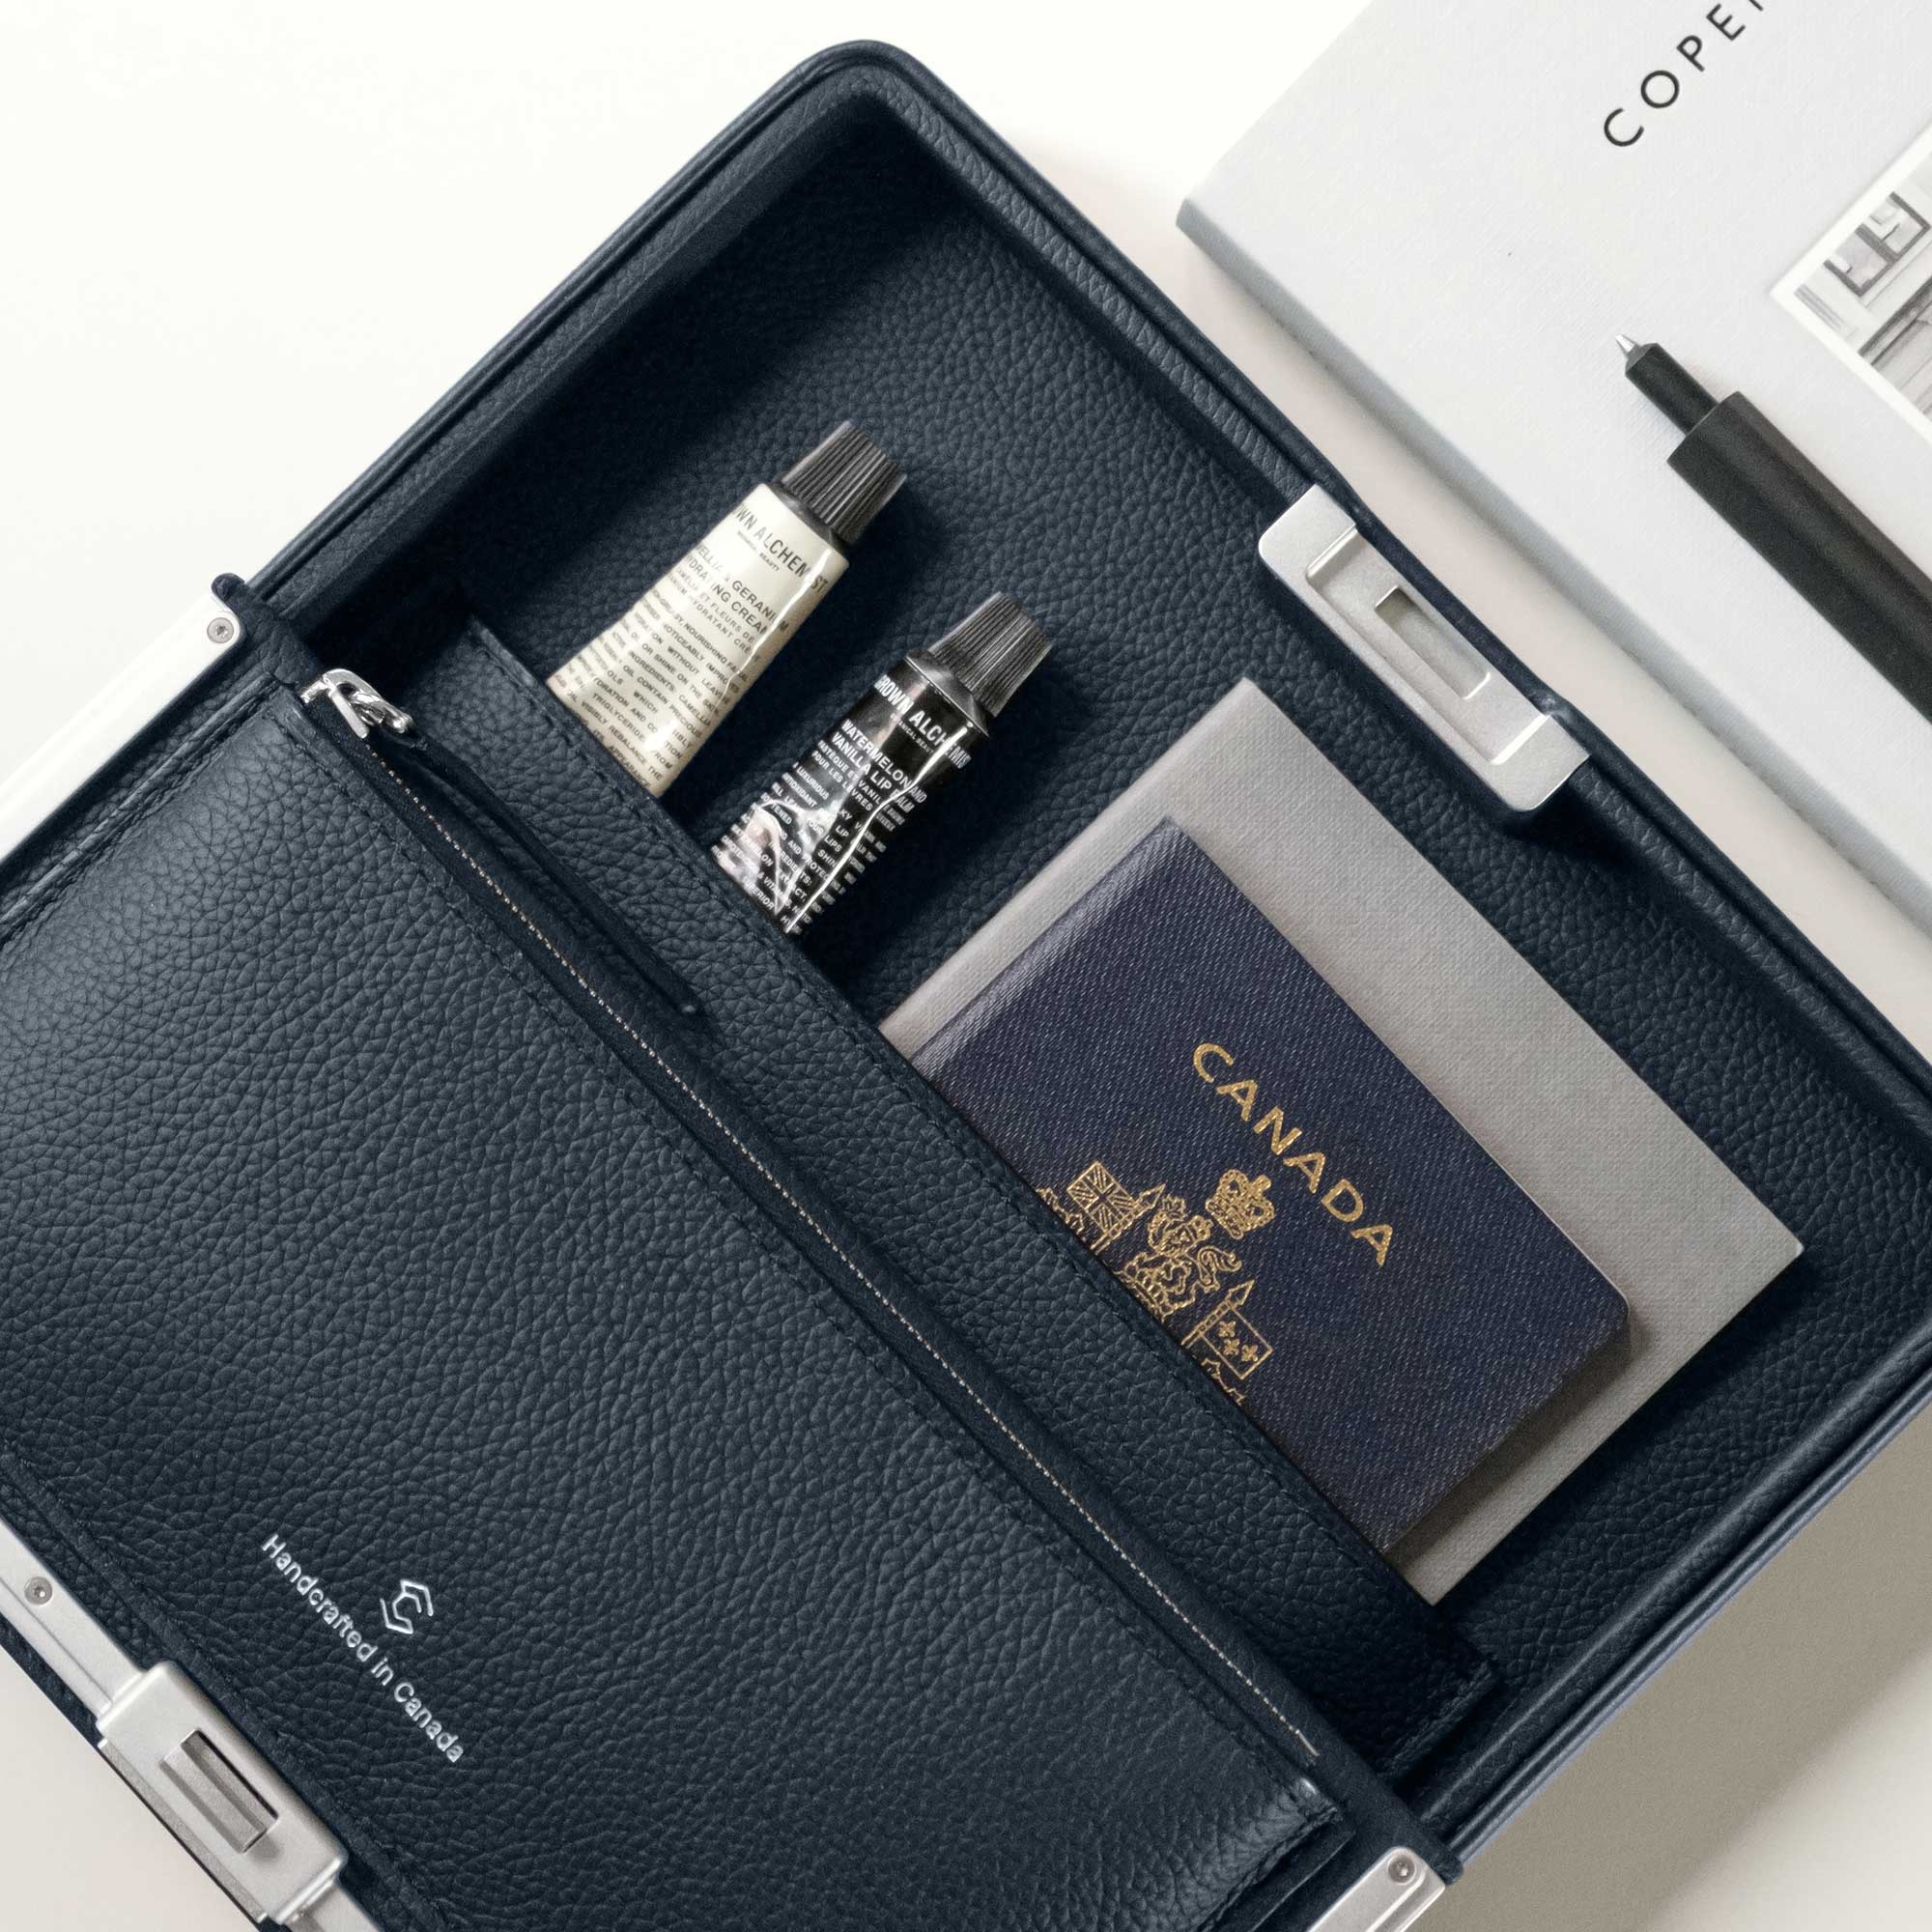 Lifestyle photo showing the elegant Fraser Travel wallet in marine holding a passport, creams, and other travel essentials